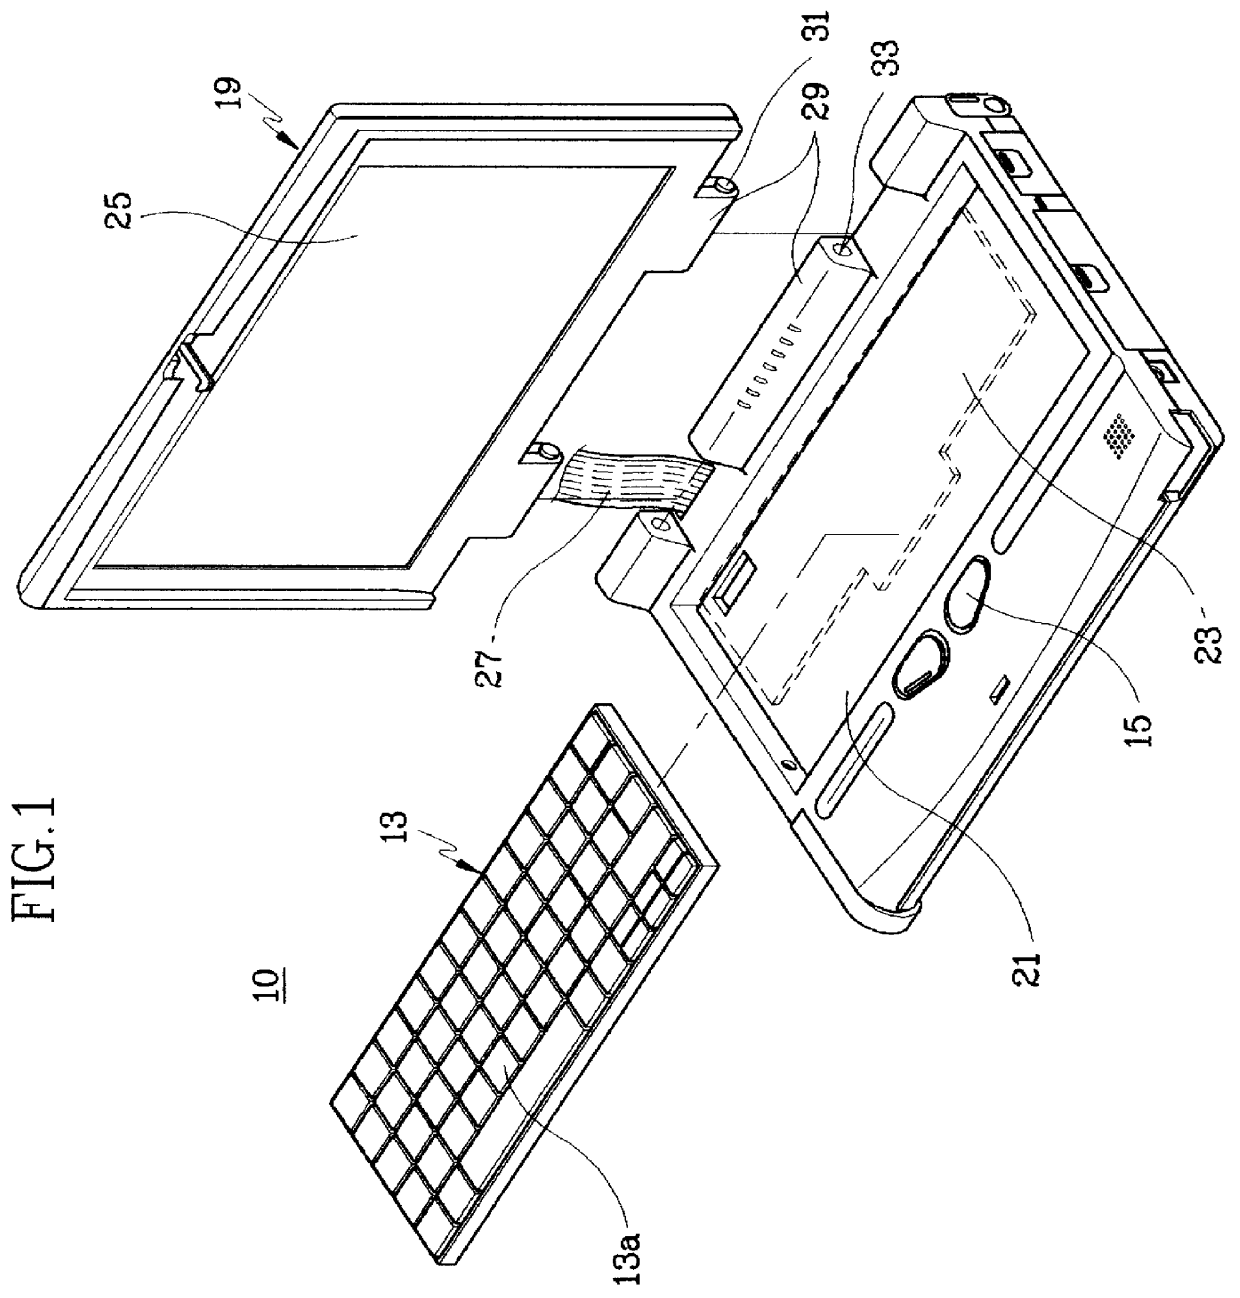 Apparatus for tilting keyboard of portable computer